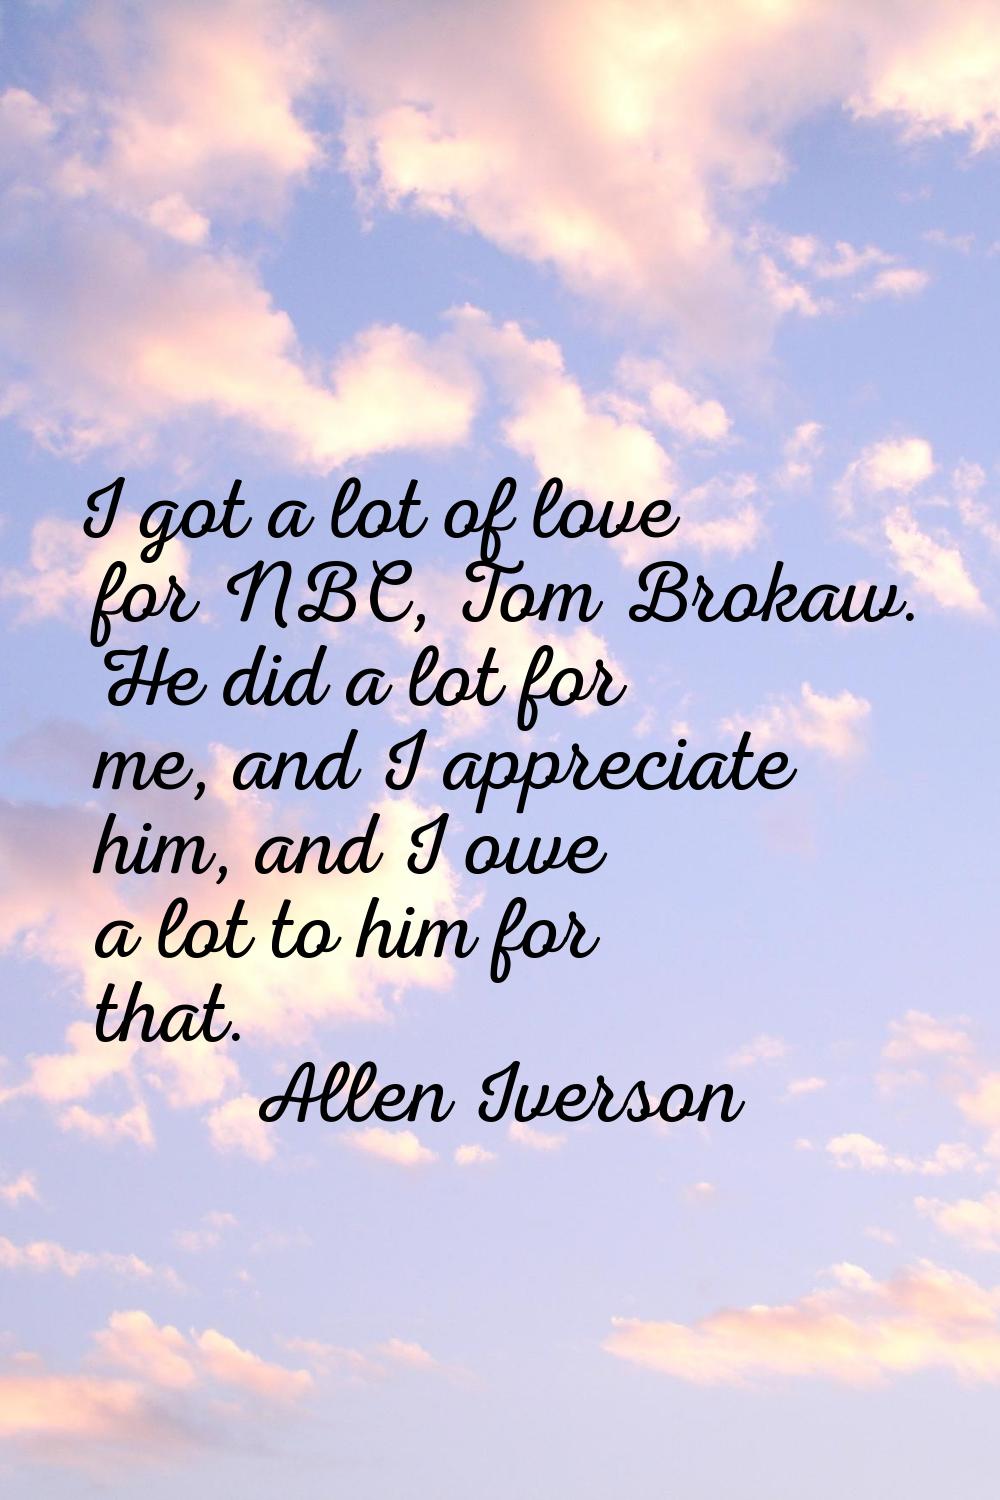 I got a lot of love for NBC, Tom Brokaw. He did a lot for me, and I appreciate him, and I owe a lot